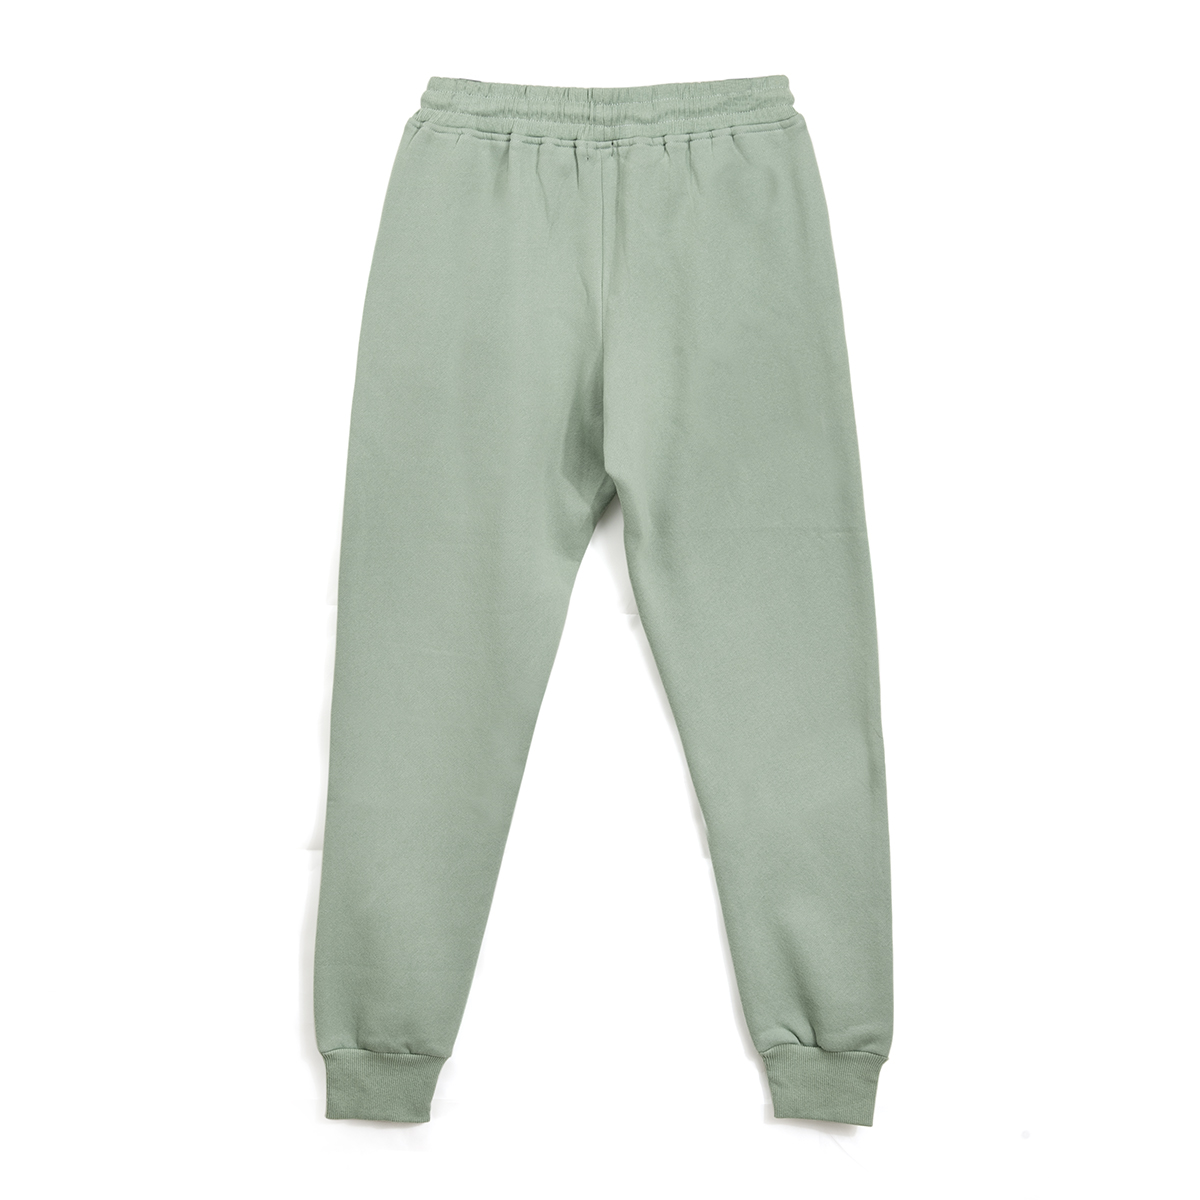 AungCrown designed loose and casual waisted sweatpants with pockets